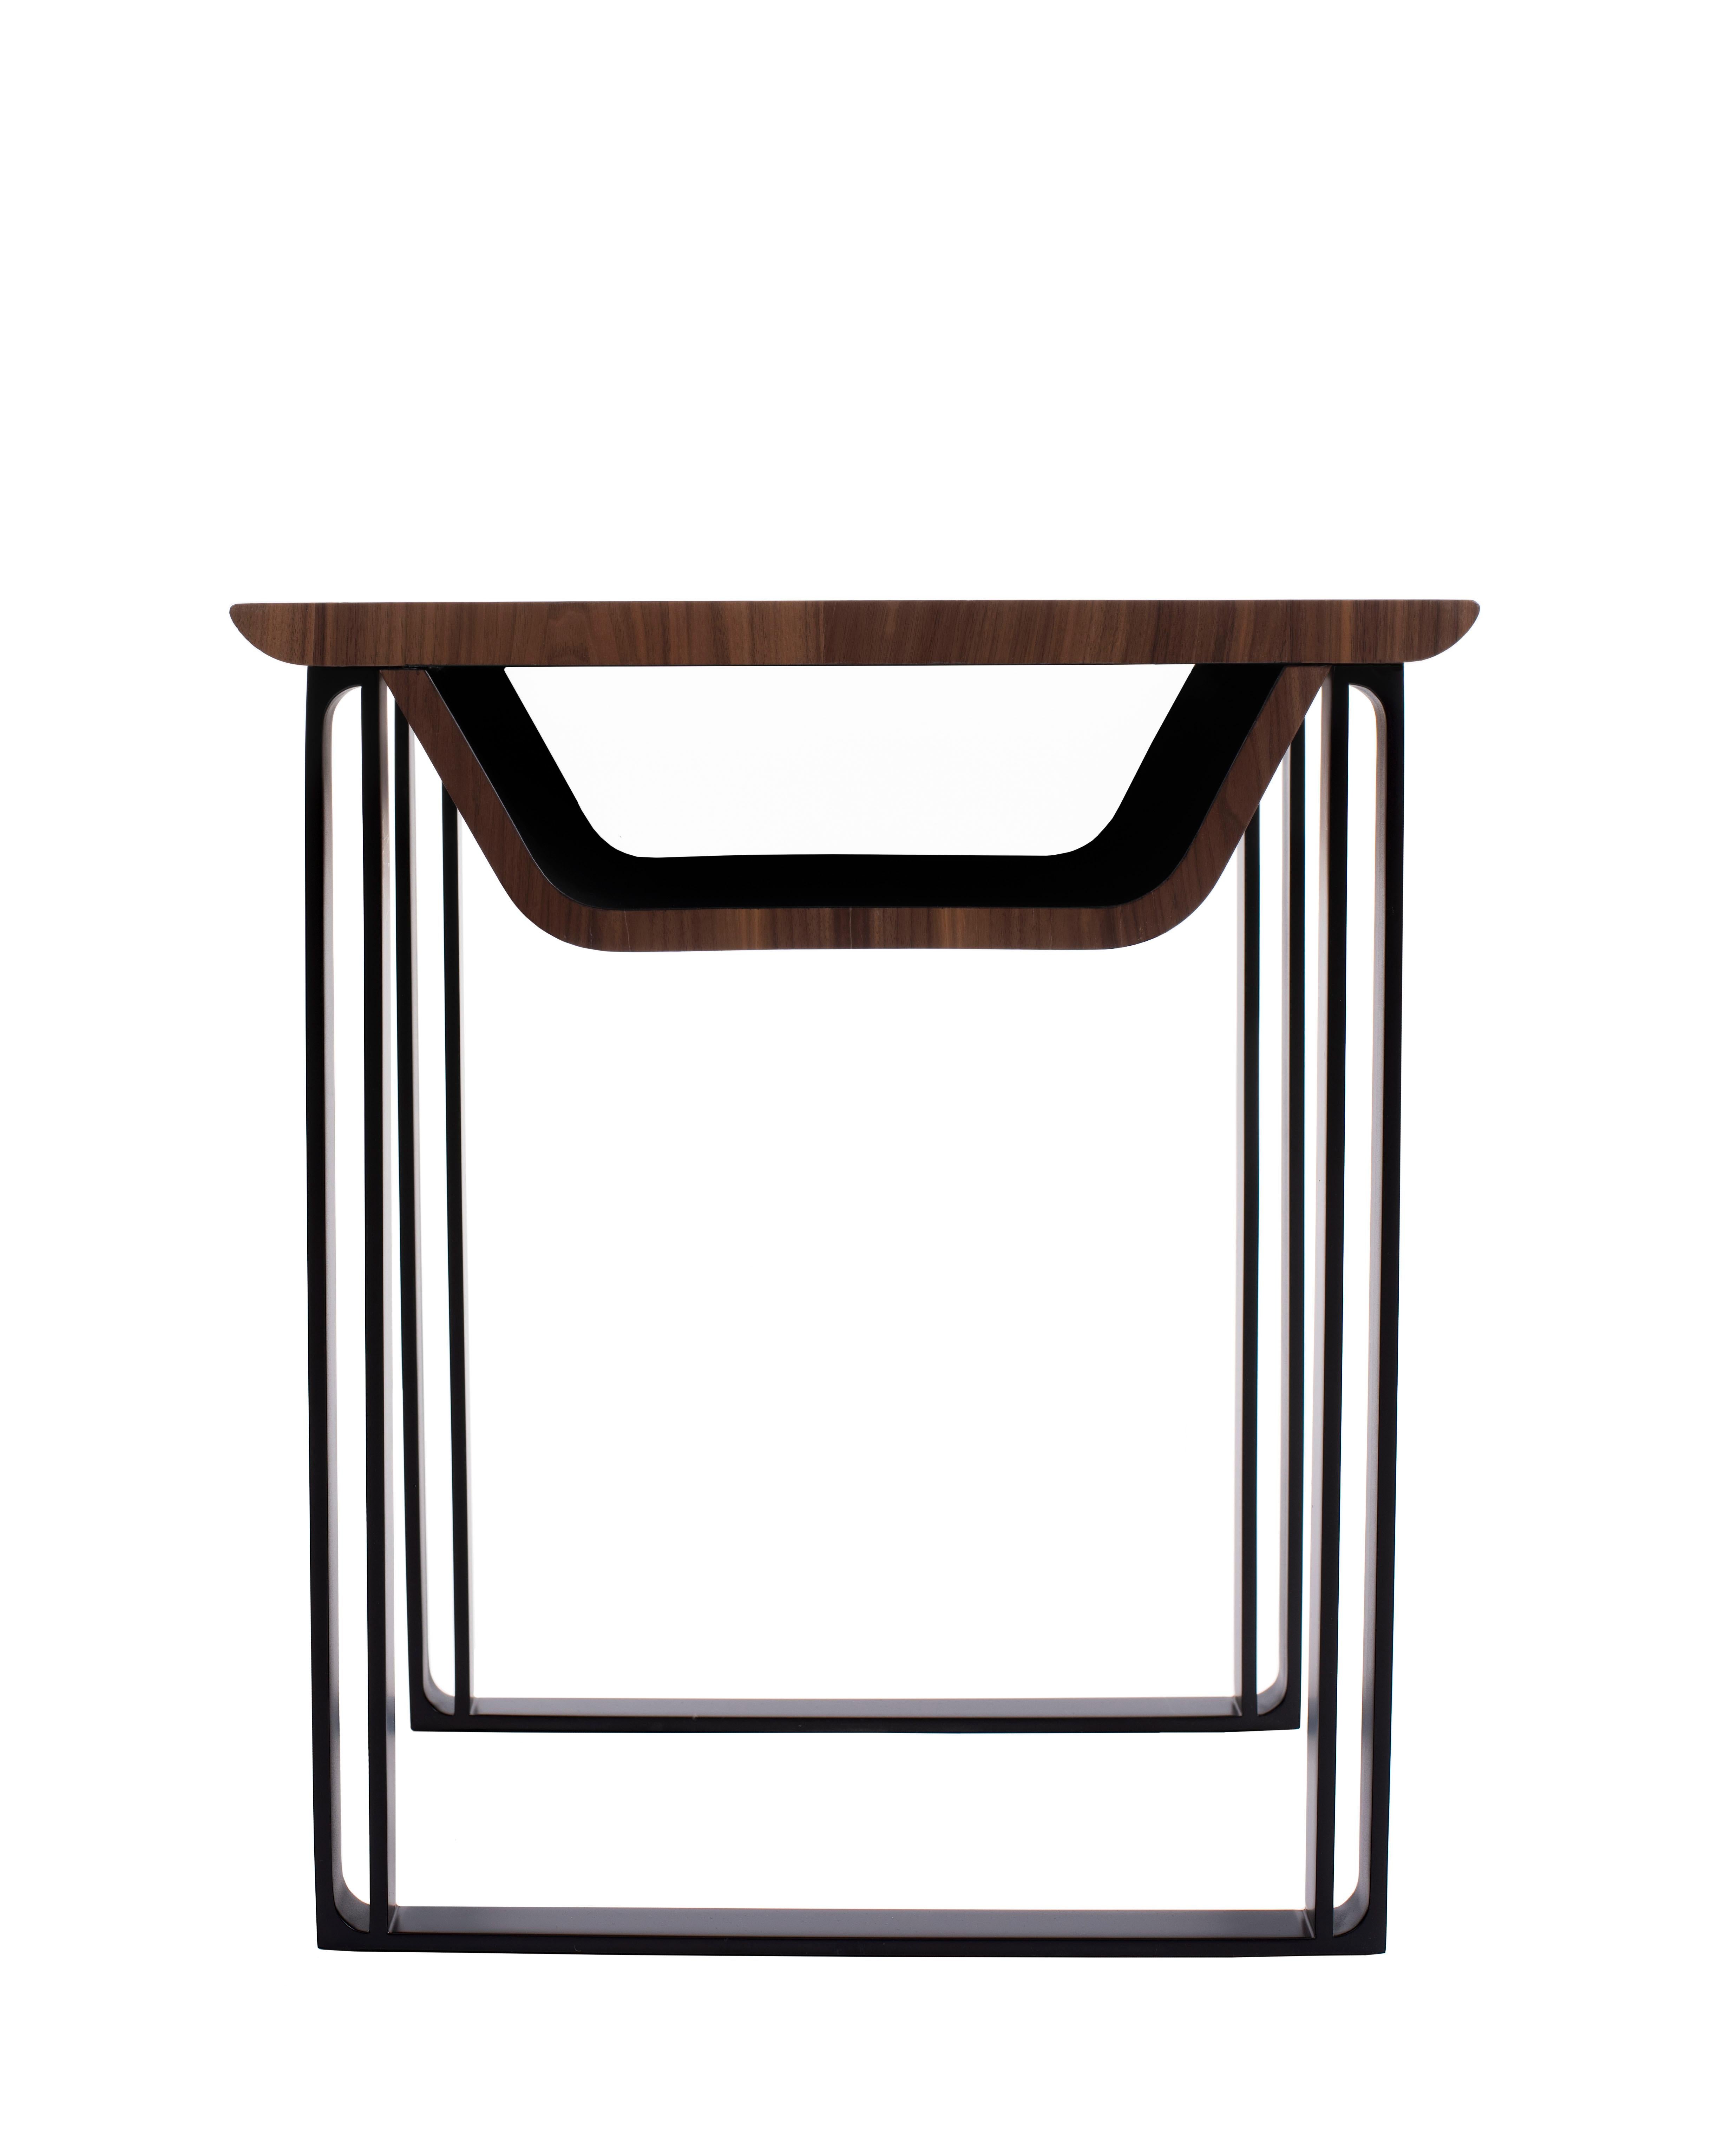 Modern Bedside table / side table hey hello wood and steel. The table top in mate Walnut. Mate finish interior Fenix (black). Base in black stainless steel mate.
This is the very first line created by Cyril Rumpler, founder of Softicated, with its